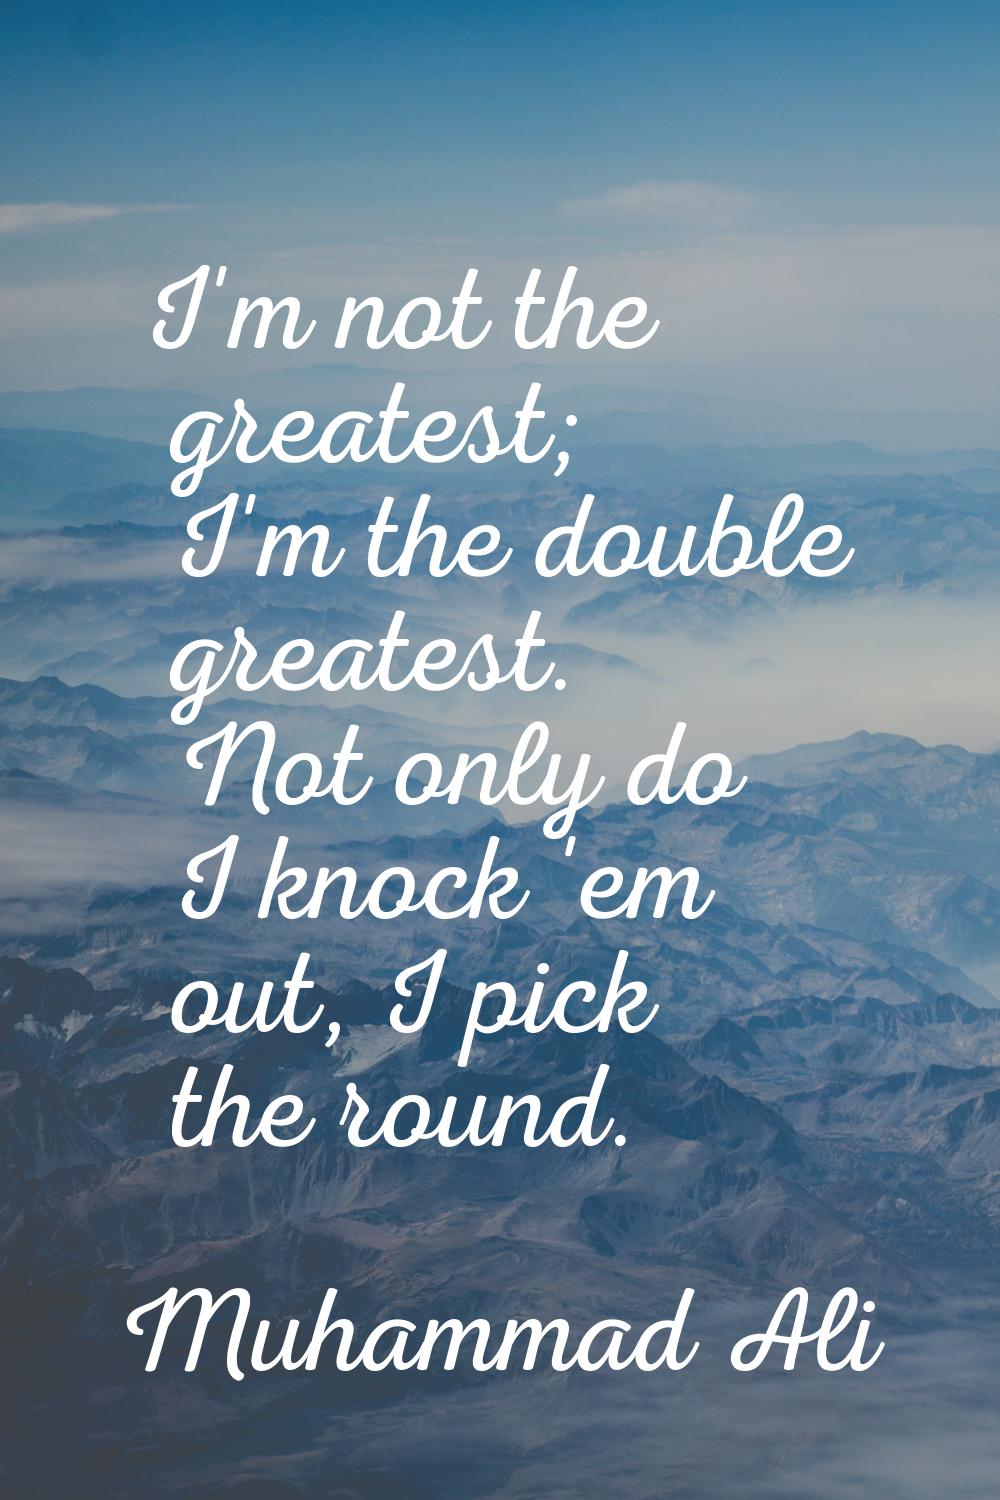 I'm not the greatest; I'm the double greatest. Not only do I knock 'em out, I pick the round.